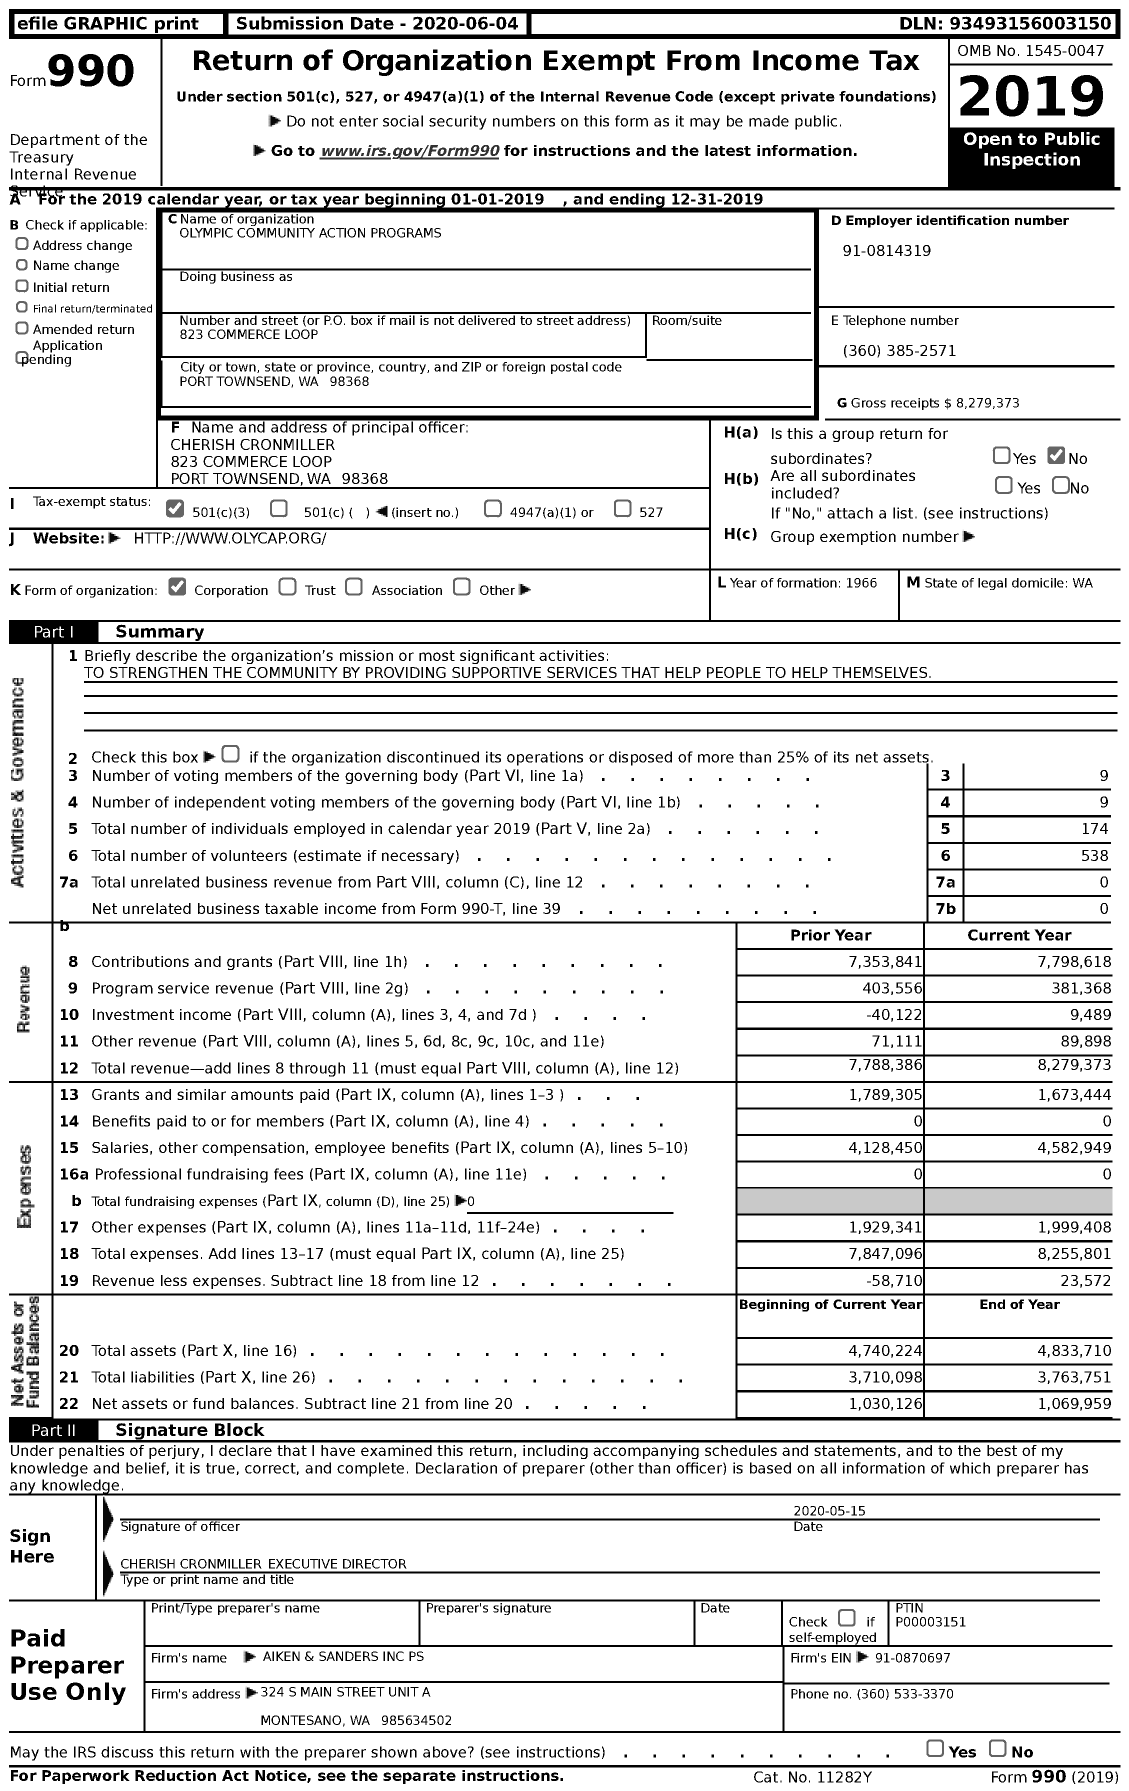 Image of first page of 2019 Form 990 for Olympic Community Action Programs (OlyCAP)